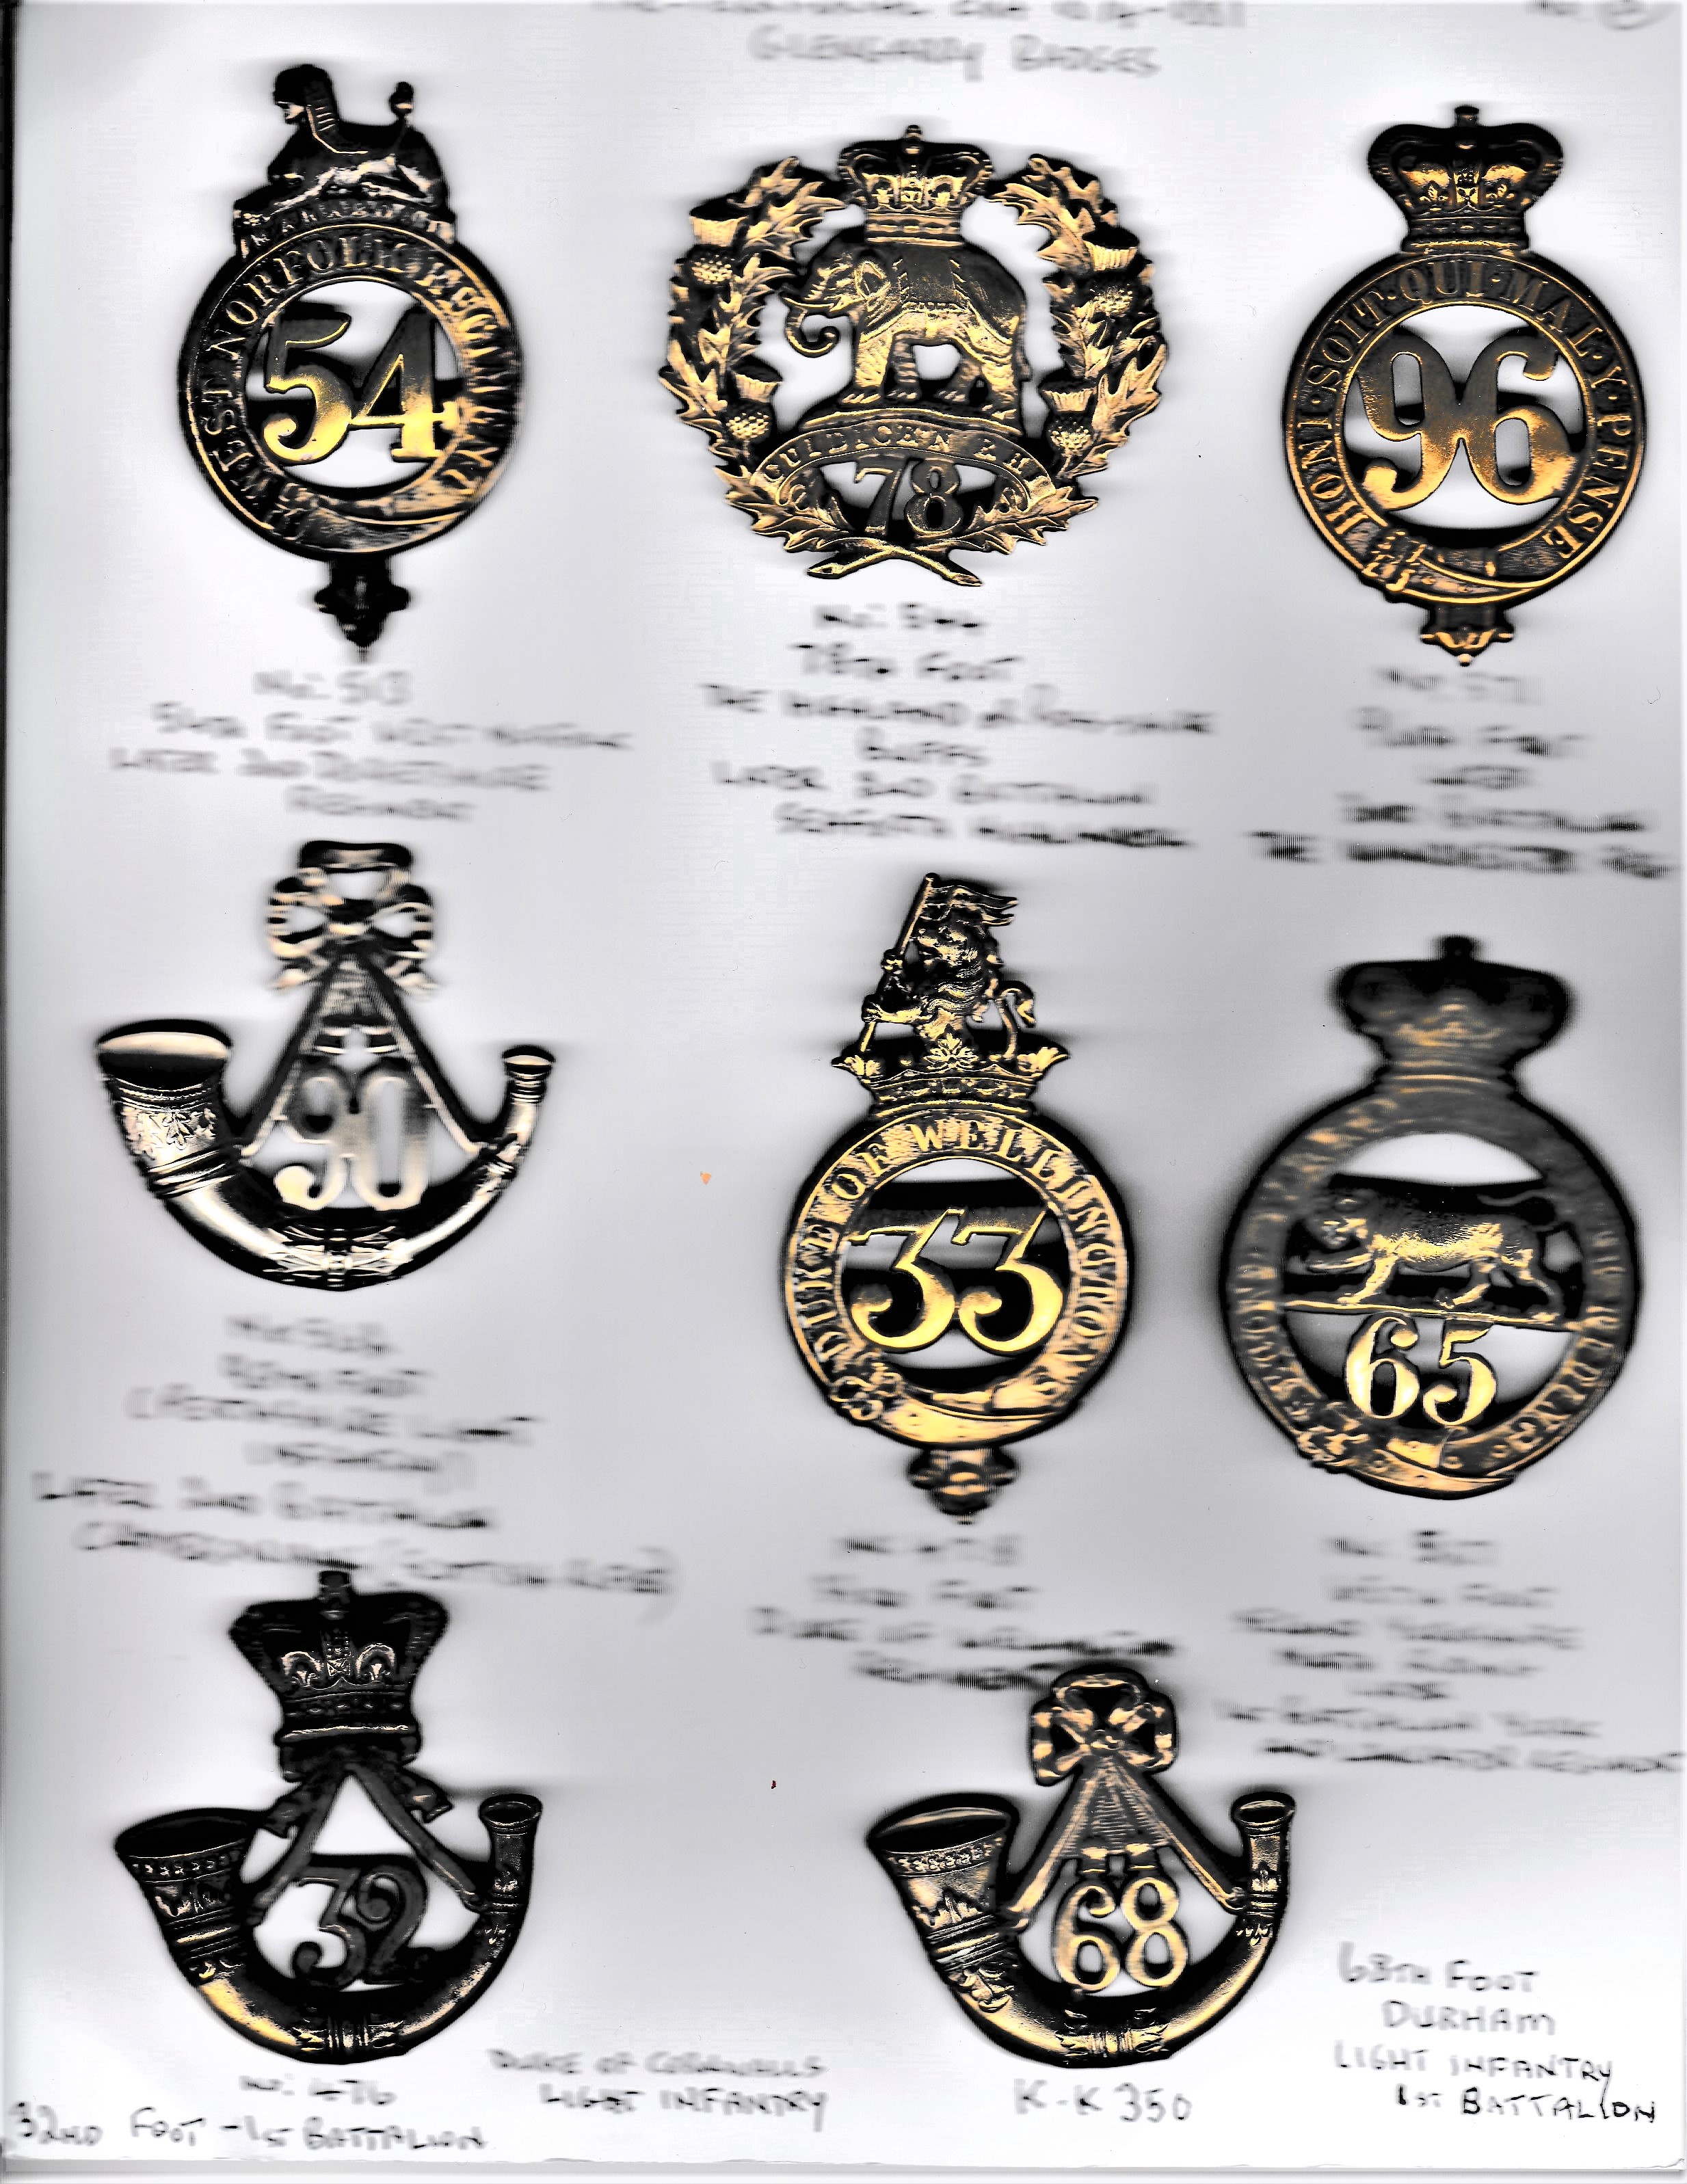 Pre-Territorial Era 1874-1881 Glengarry Badges (8) including: The 54th Foot (West Norfolk later